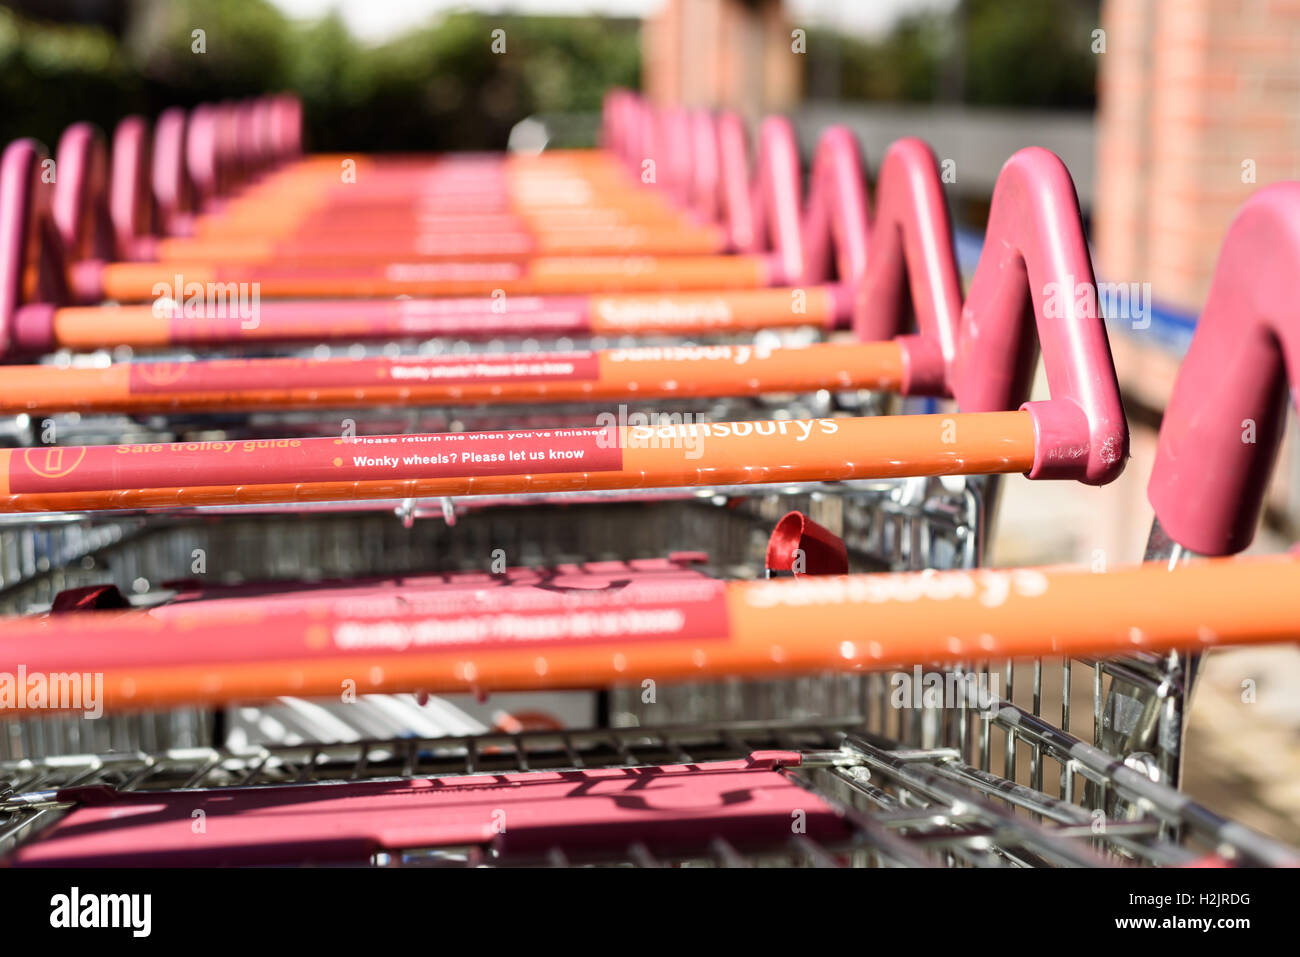 Sainsbury’s shopping trolleys belonging to the popular supermarket chain parked in a row outdoors with no groceries in the carts Stock Photo